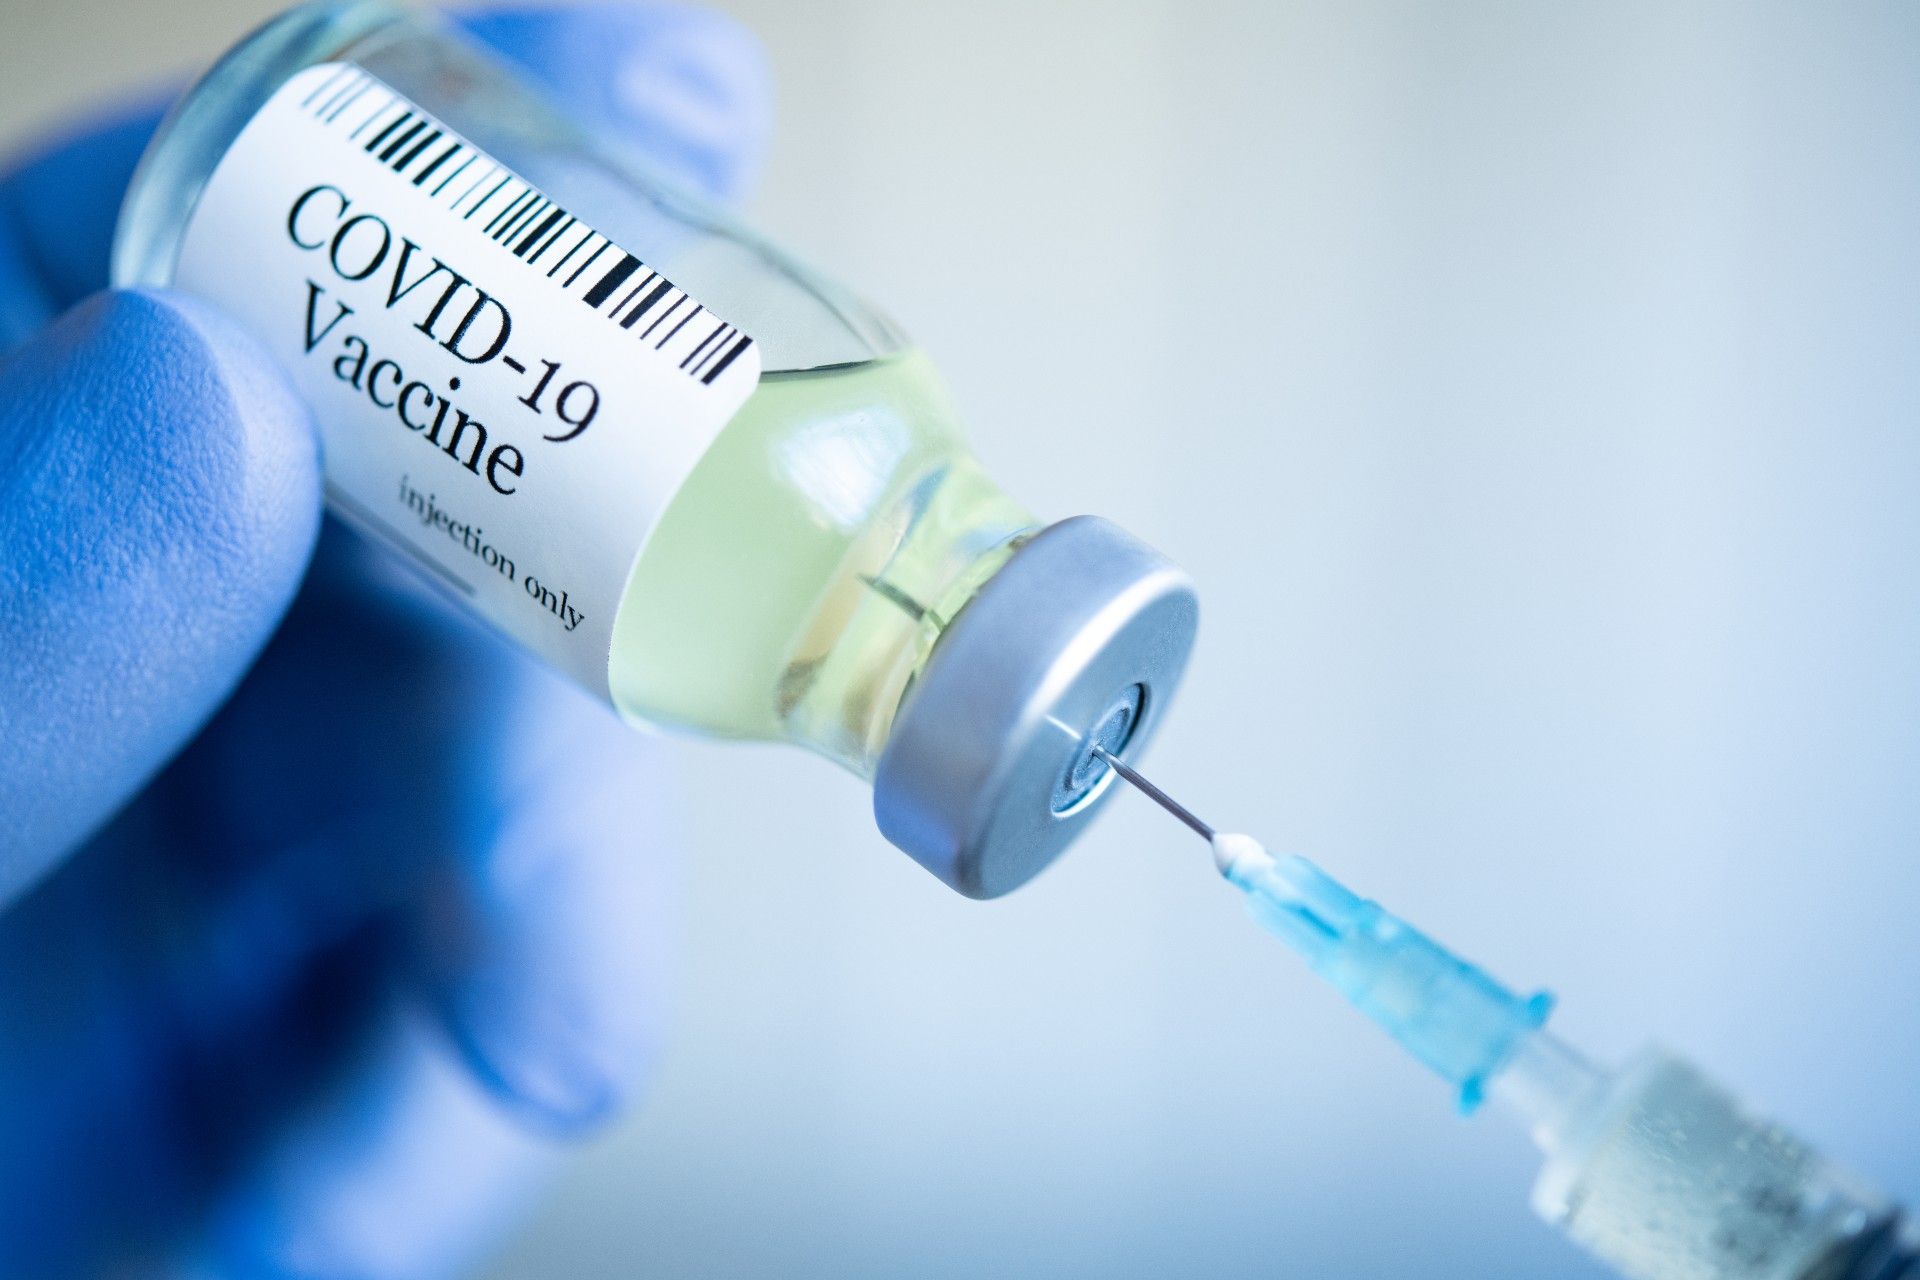 A person wearing blue gloves fills a syringe from a vial that reads "COVID-19 vaccine" - coronavirus vaccine